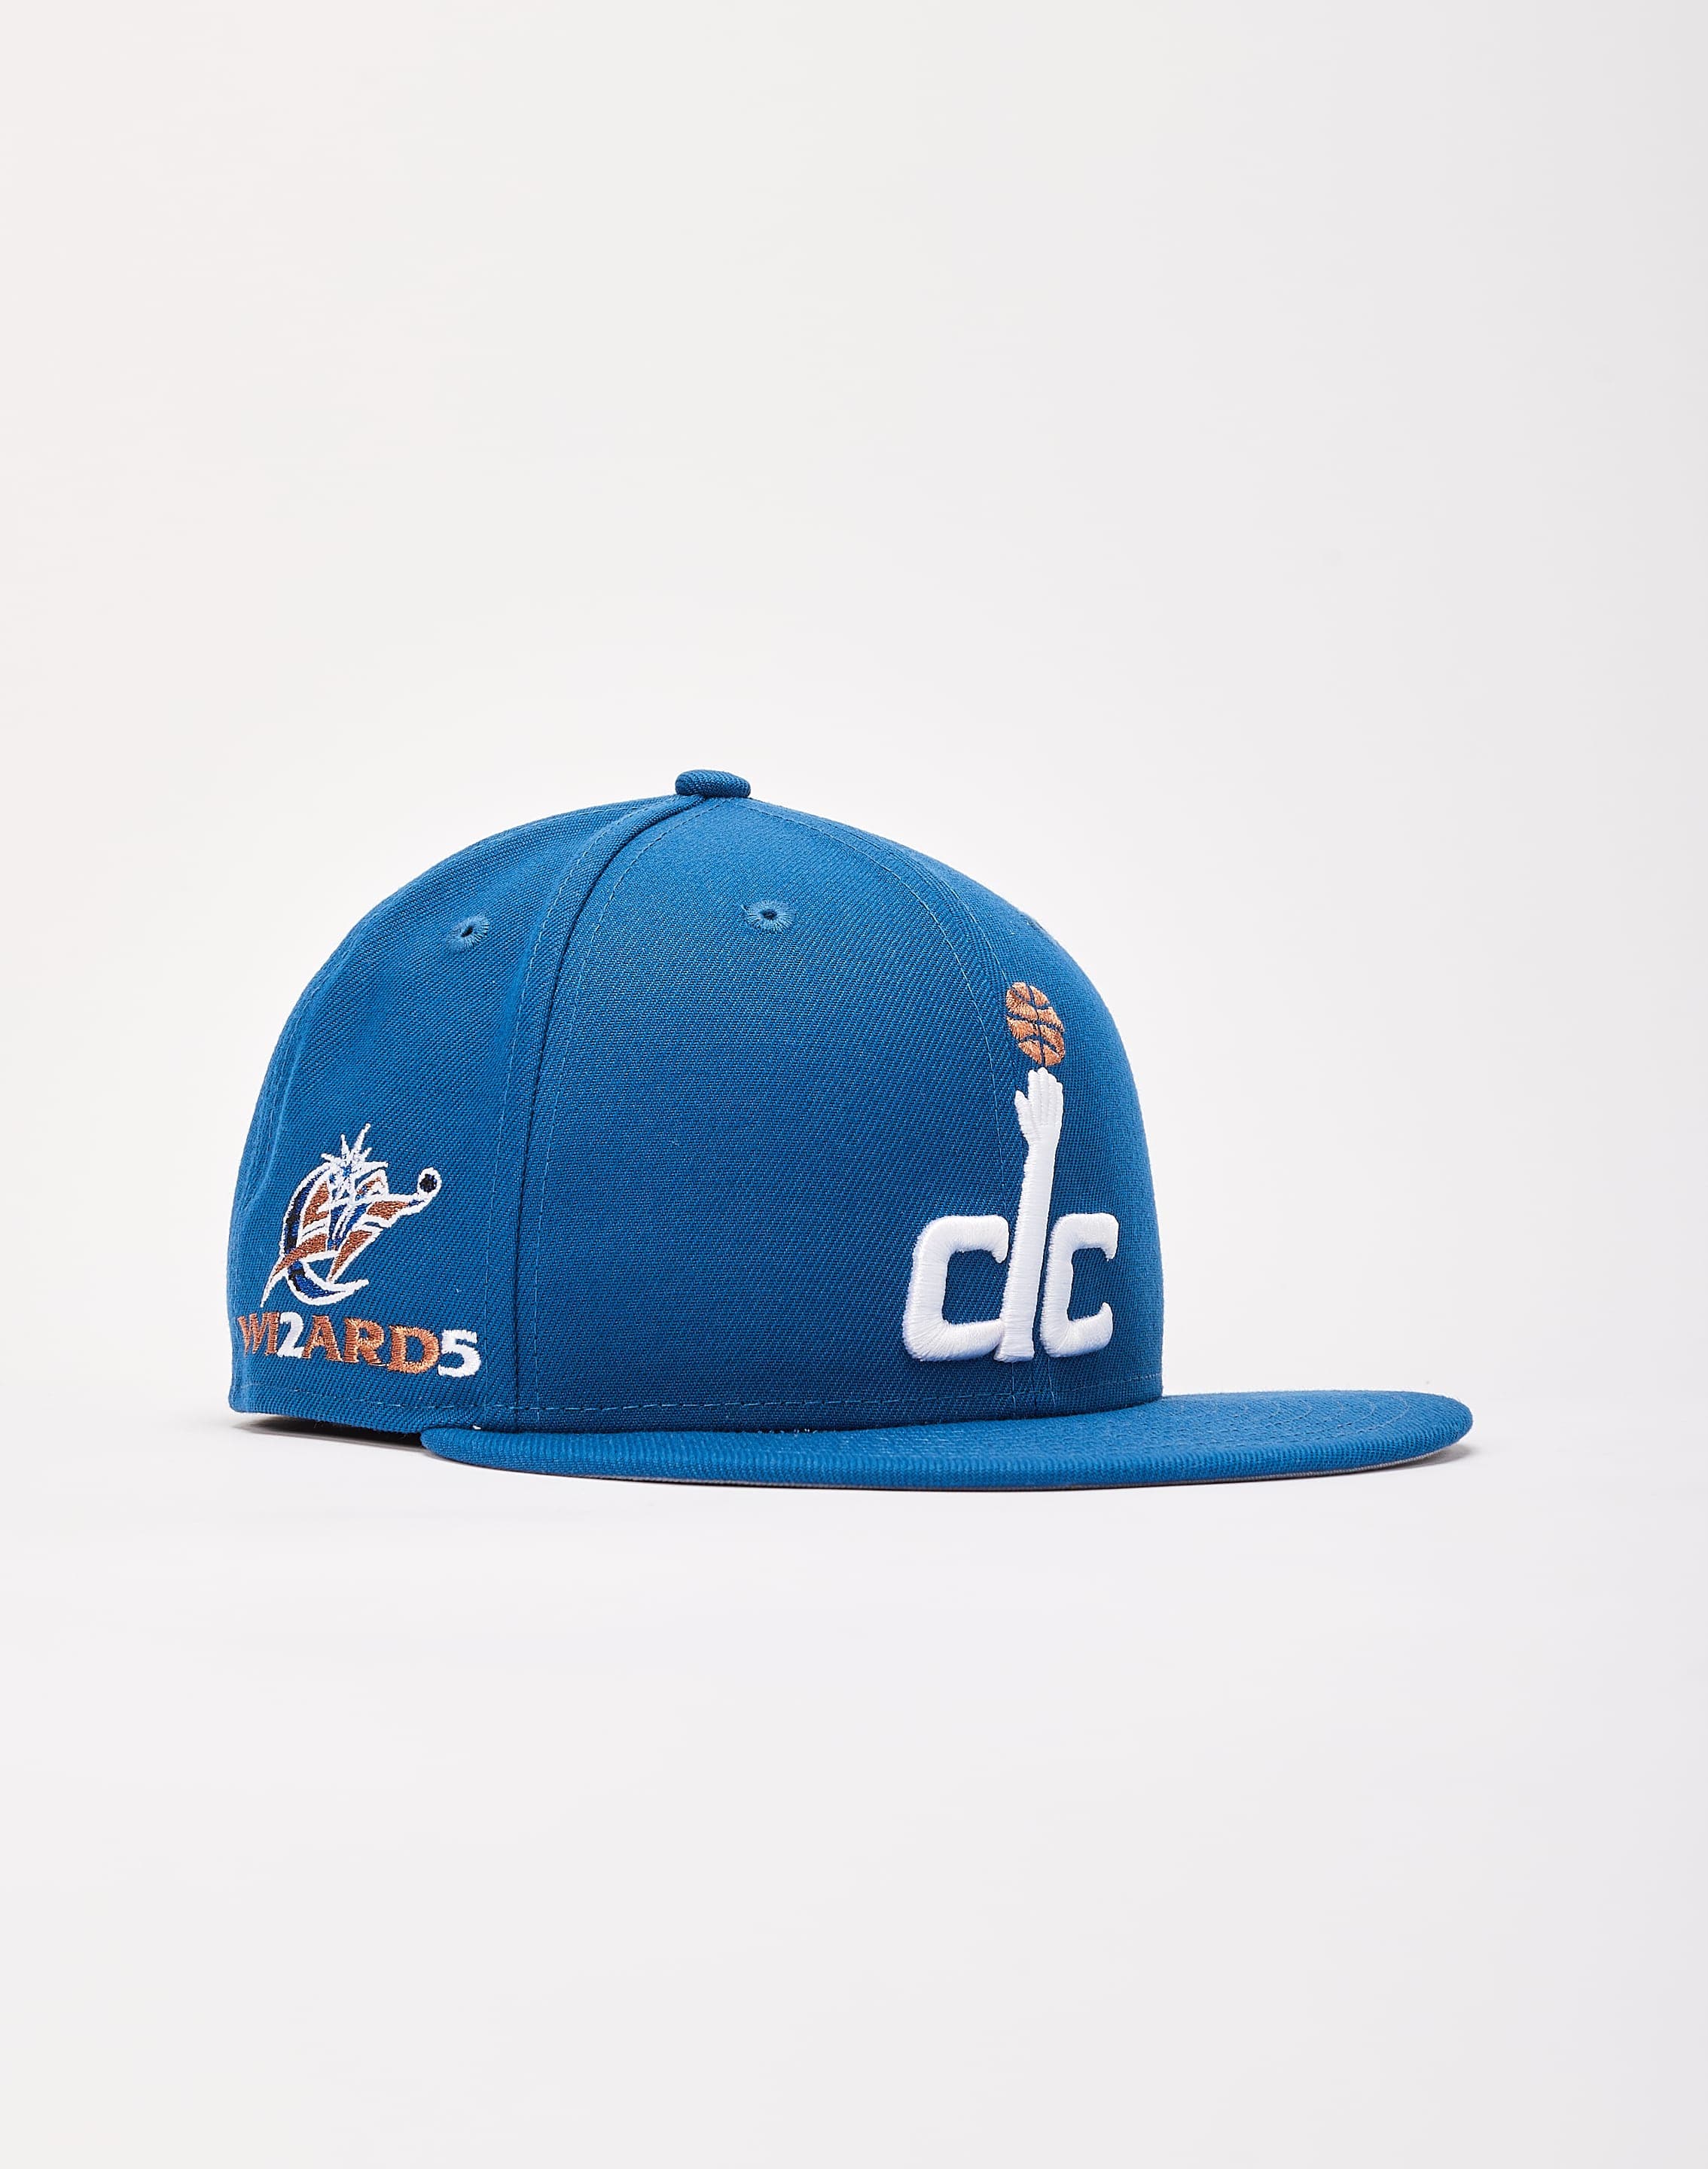 Washington Wizards - 2020/21 City Edition Primary 9Fifty NBA Hat